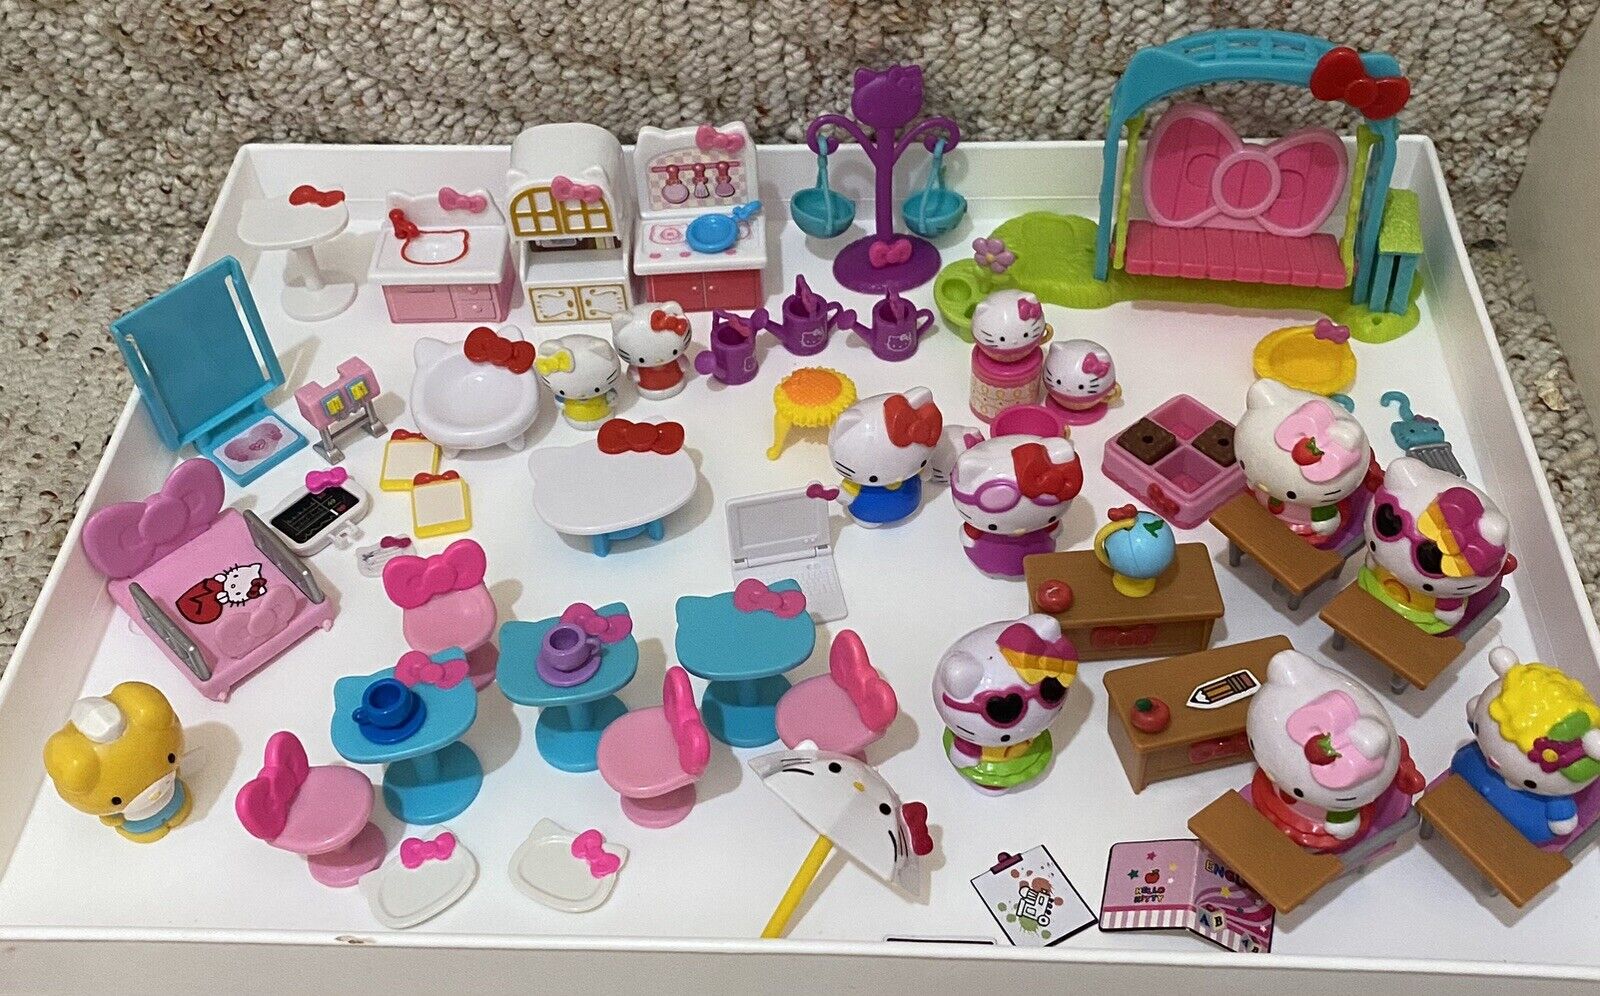 Large Lot Of Hello Kitty Figures Furniture School Home Cafe Hospital Accessories